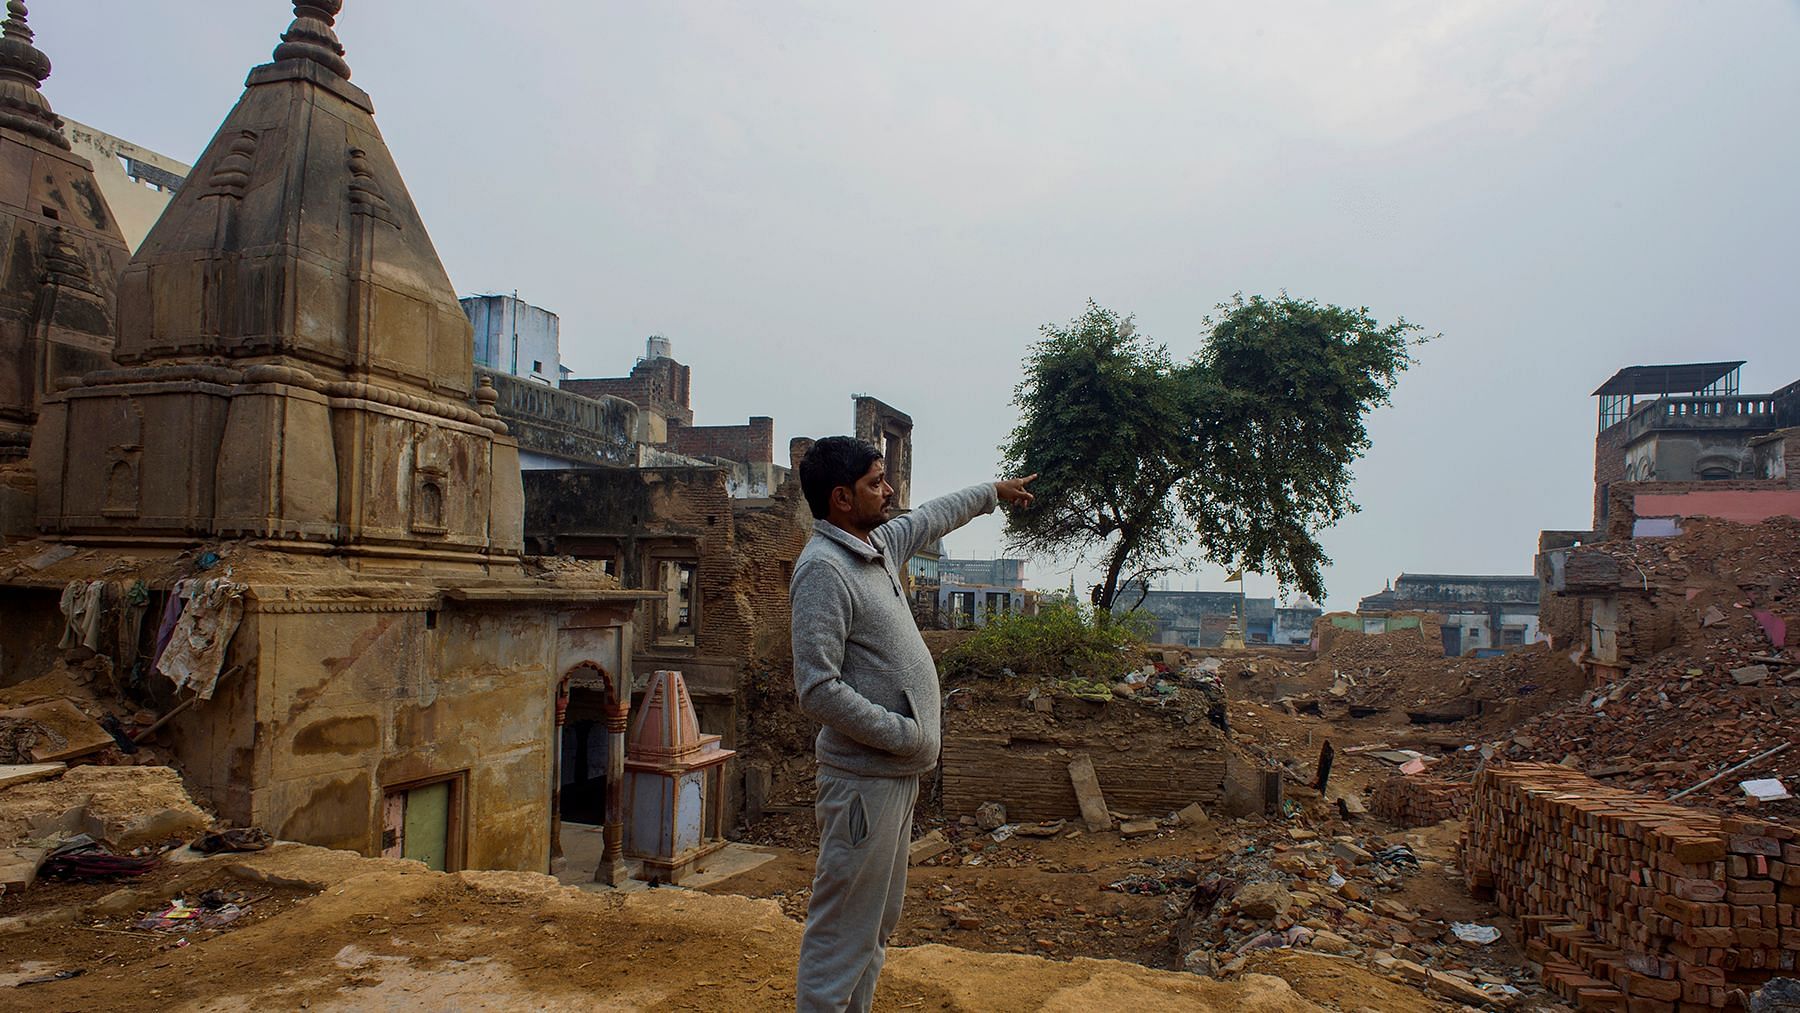 Prabhu Singh points towards his house that he refuses to part with unless he gets the amount he wants as compensation.